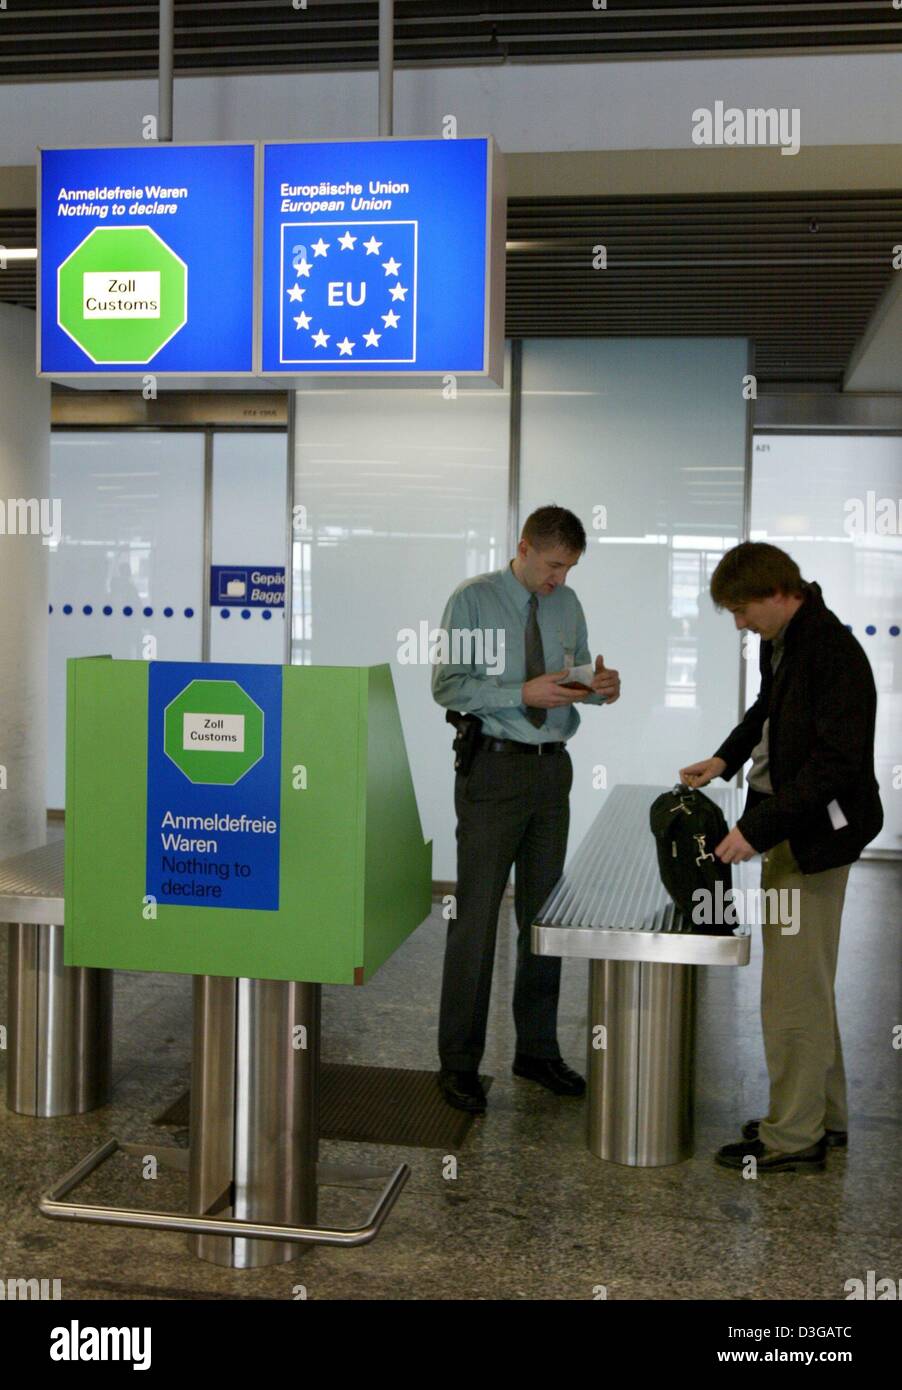 (dpa) - A customs officer at a customs checkpoint inspects the luggage and documents of a traveller at the airport in Frankfurt, Germany, 20 April 2004. In the past, several customs checkpoints at Germany's largest airport had been unoccupied, but officials claimed that supervision had been sufficient due to random checks that were regularly performed. Stock Photo